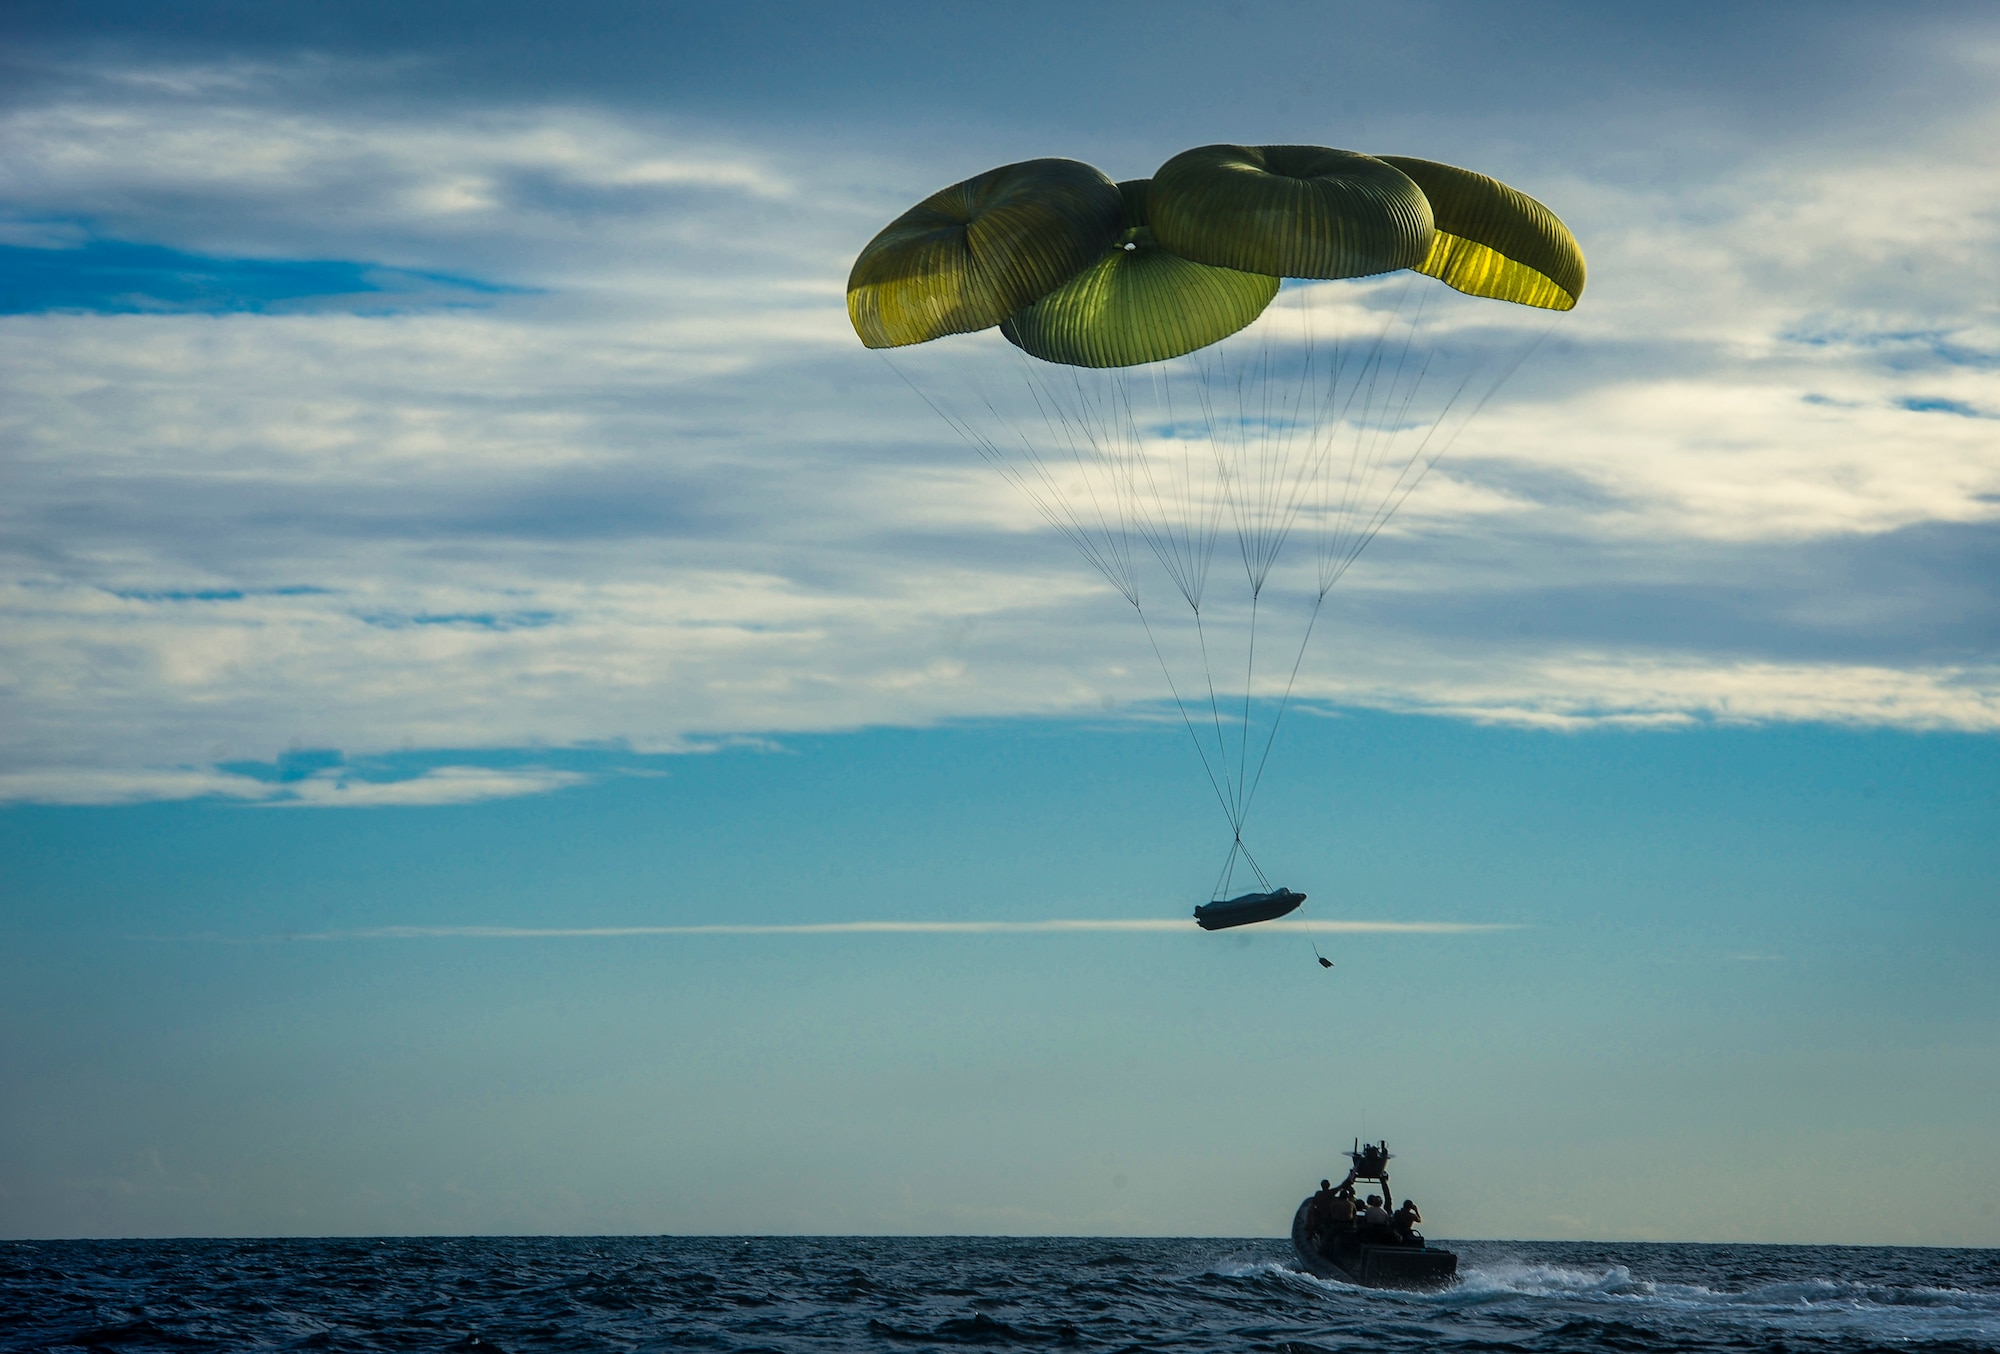 A rigid inflatable boat descends into the Gulf of Mexico after being deployed from an MC-130H Combat Talon II during Maritime Craft Aerial Delivery Systems (MCADS) training, Nov. 12, 2015. MCADS enable special operation forces members to rapidly deploy anywhere around the world in a maritime environment. (U.S. Air Force photo by Senior Airman Meagan Schutter)